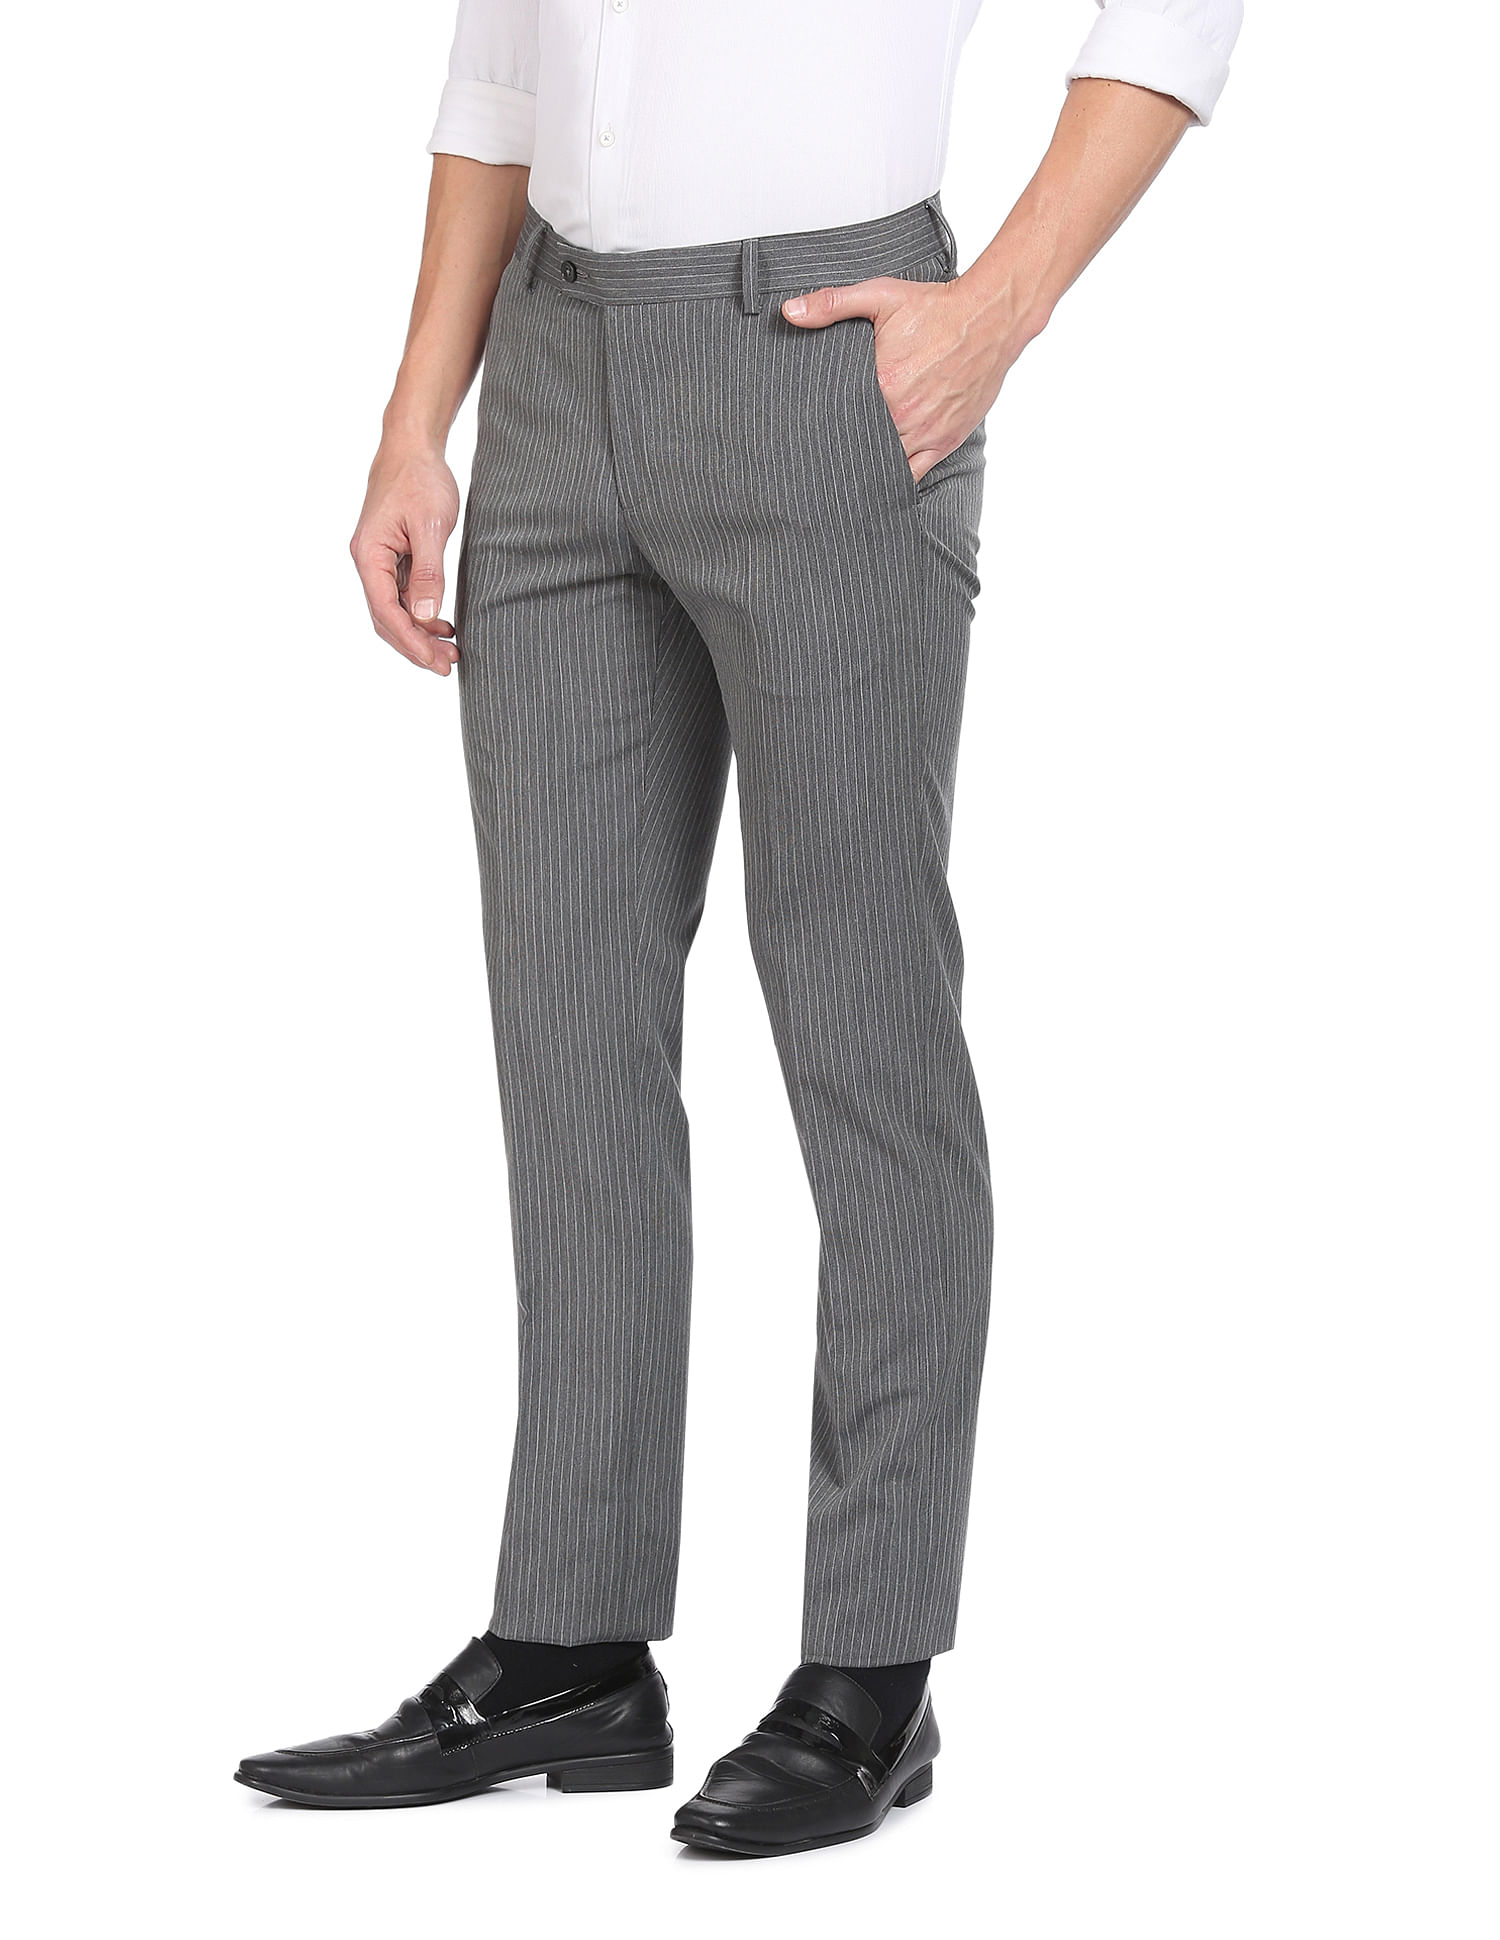 Men Striped Tapered Dress Pants Formal Office Business Trousers Slim Fit  Casual | eBay